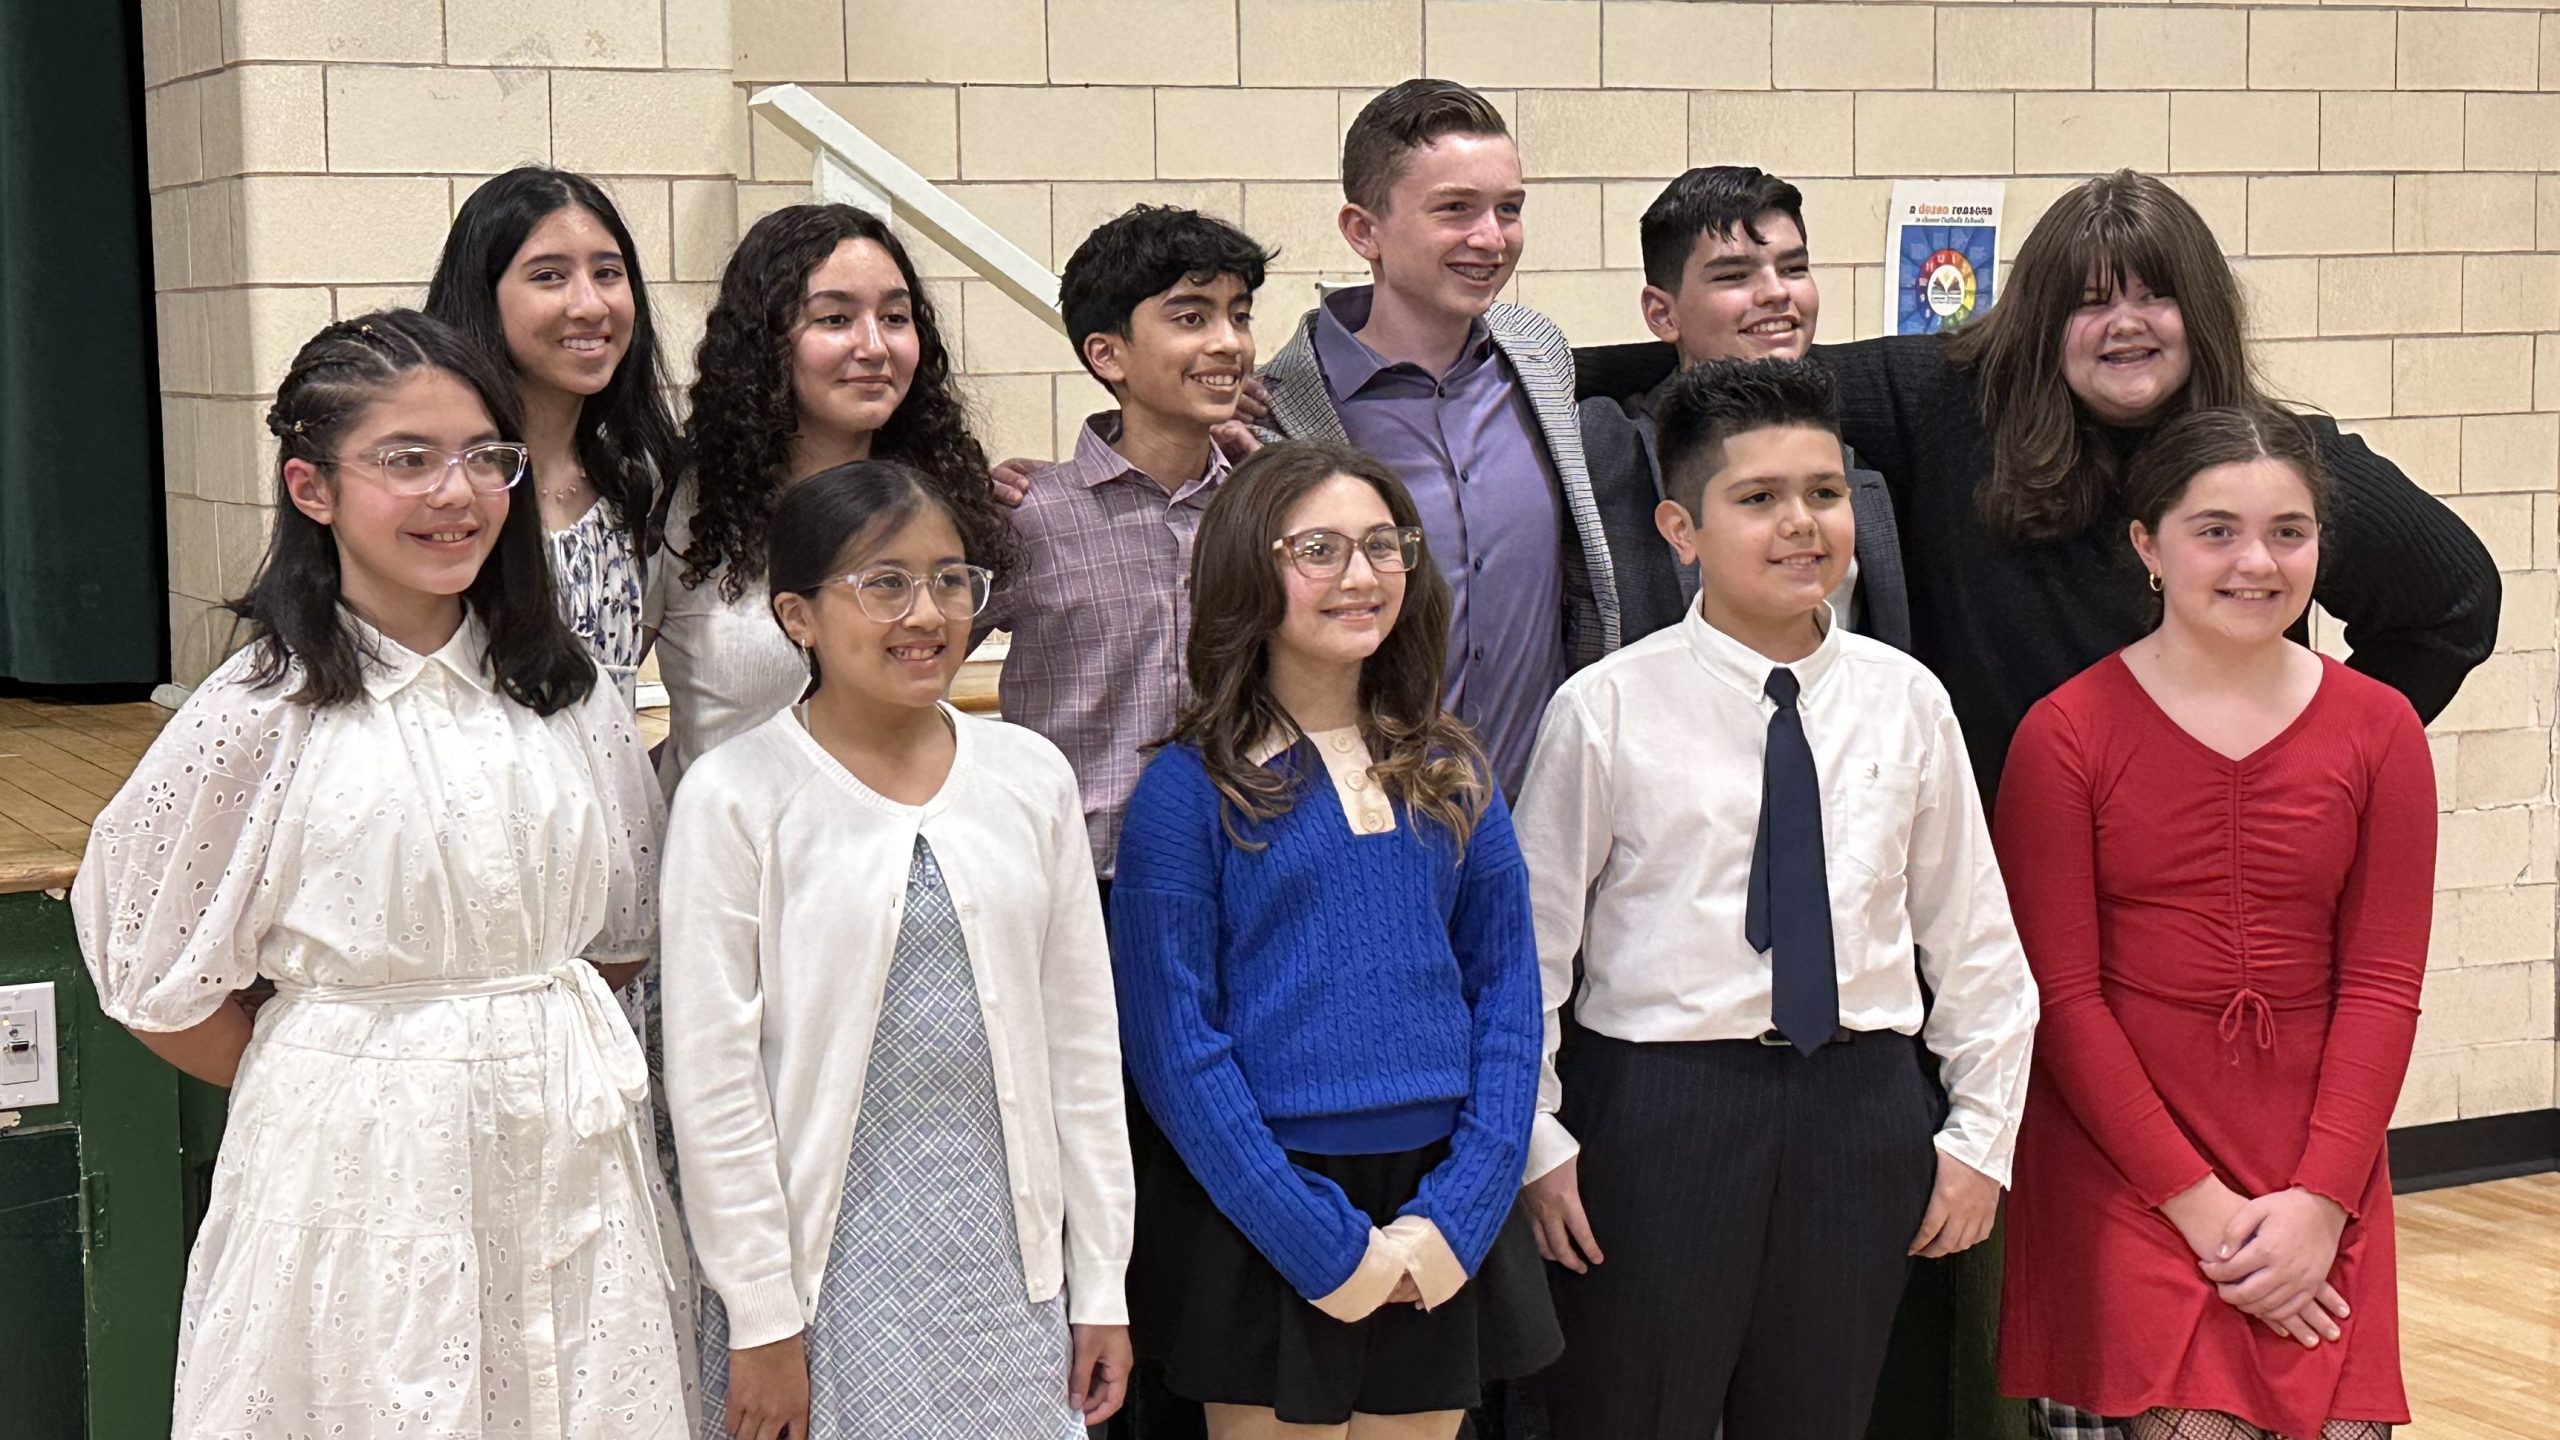 Saint Theresa School Students Compete at Catholic League of Forensics Competition